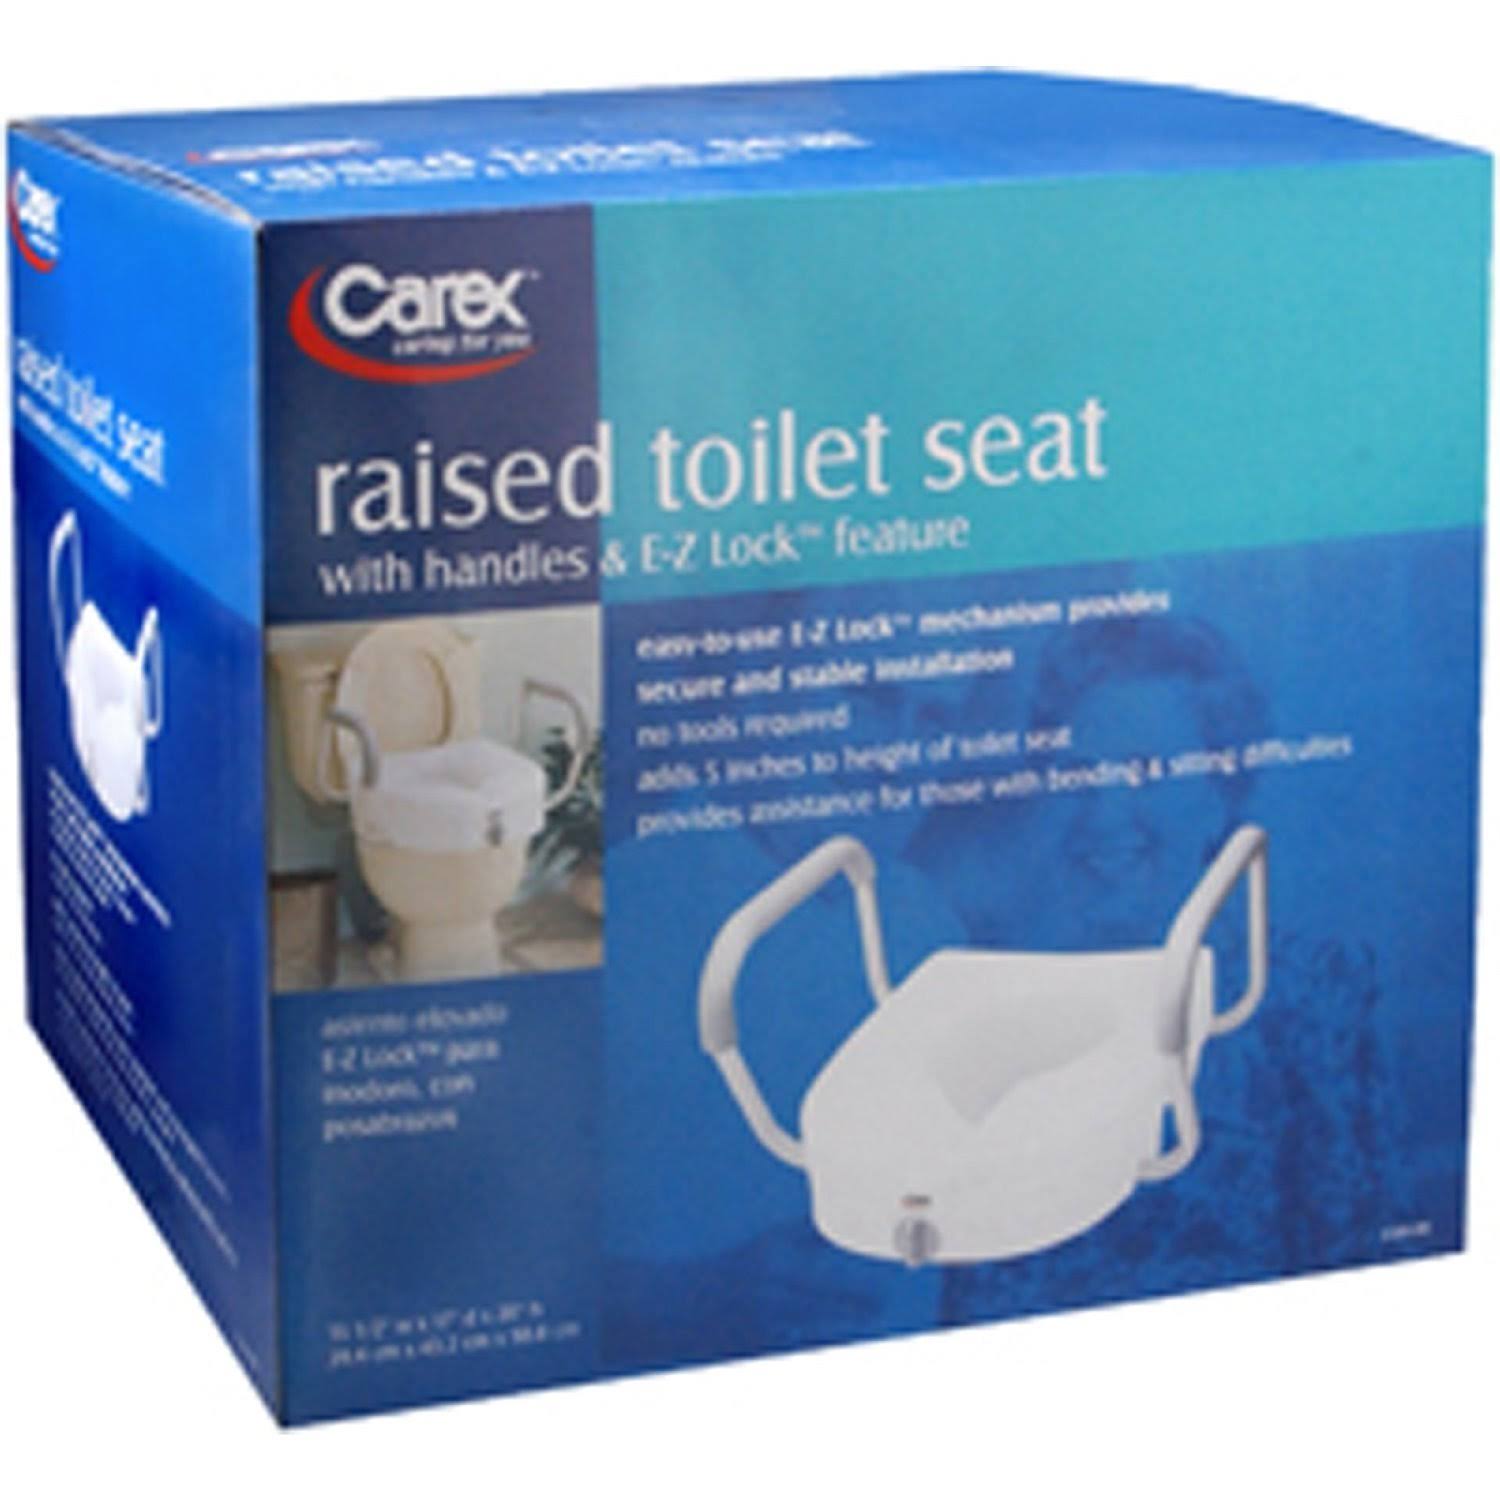 Carex Raised Toilet Seat - E-z Lock, with Arms